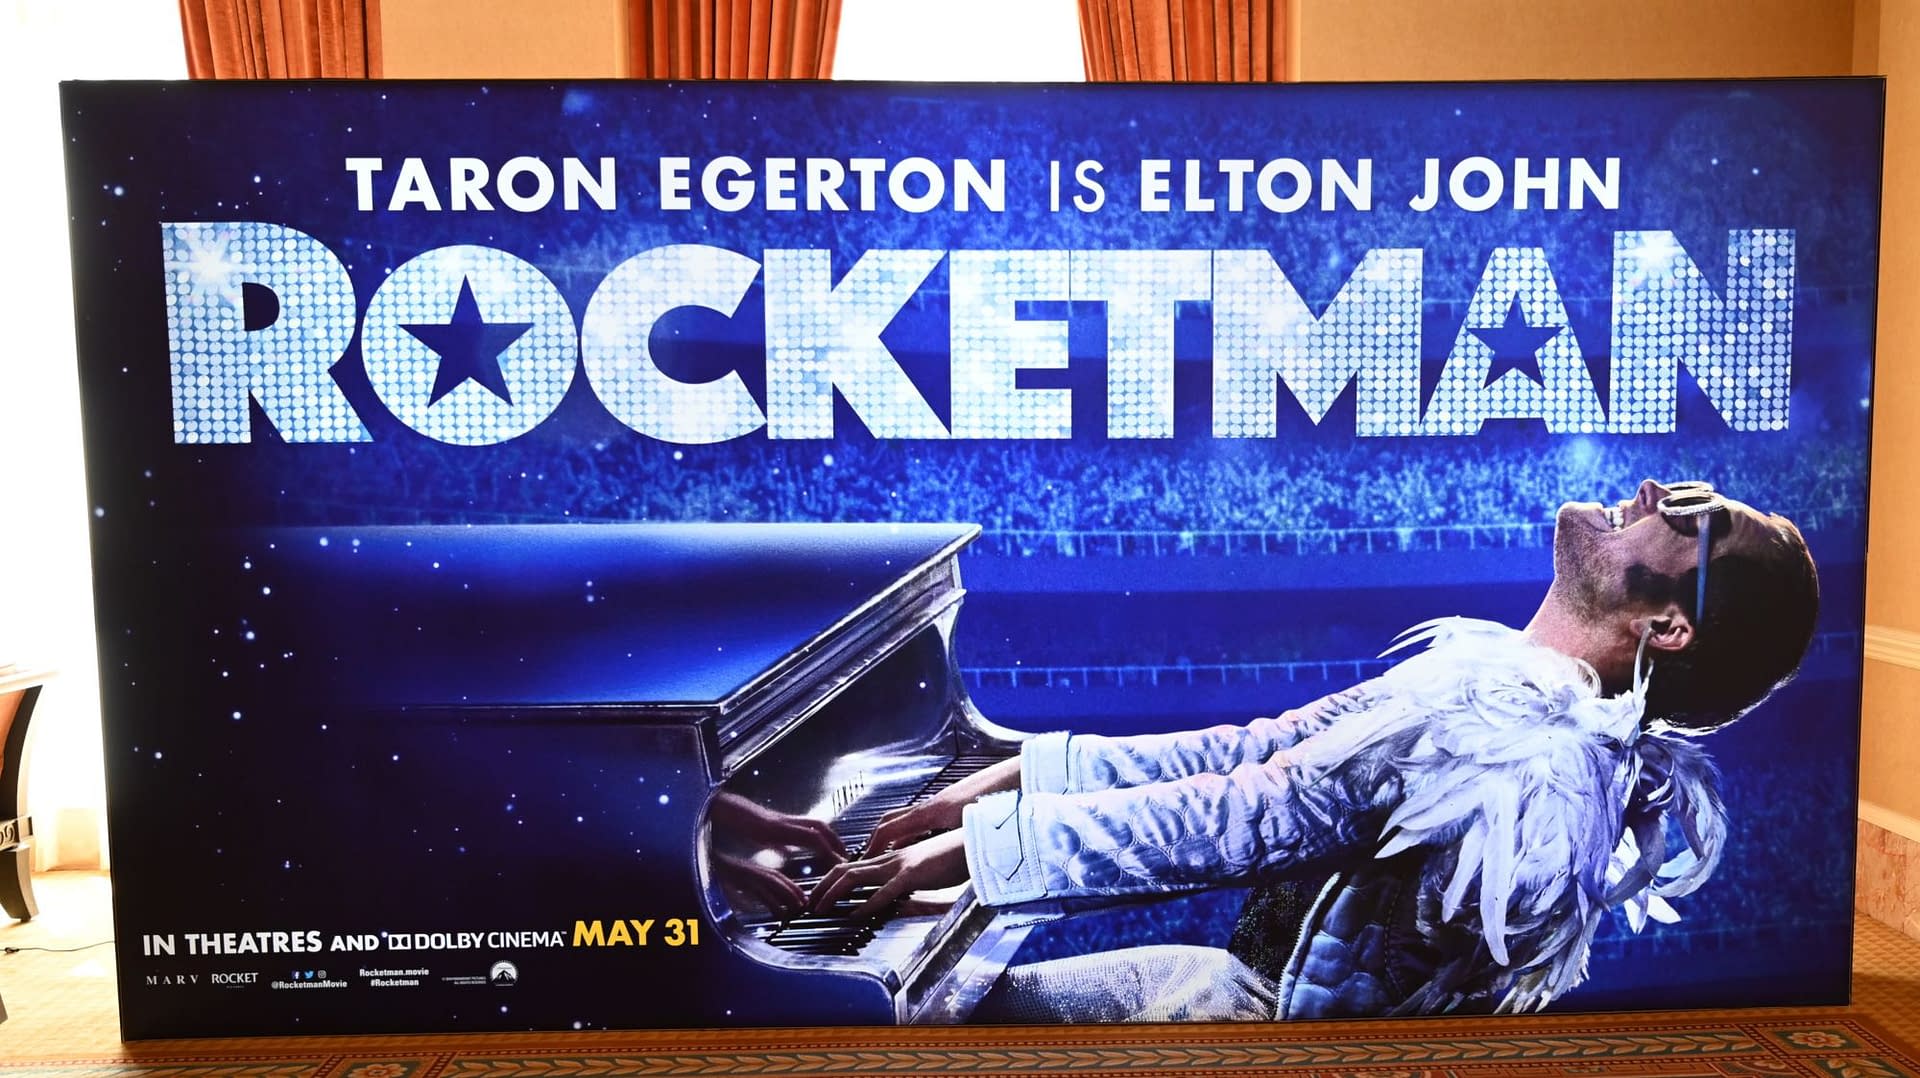 [CinemaCon 2019] Another New Standee for Rocketman